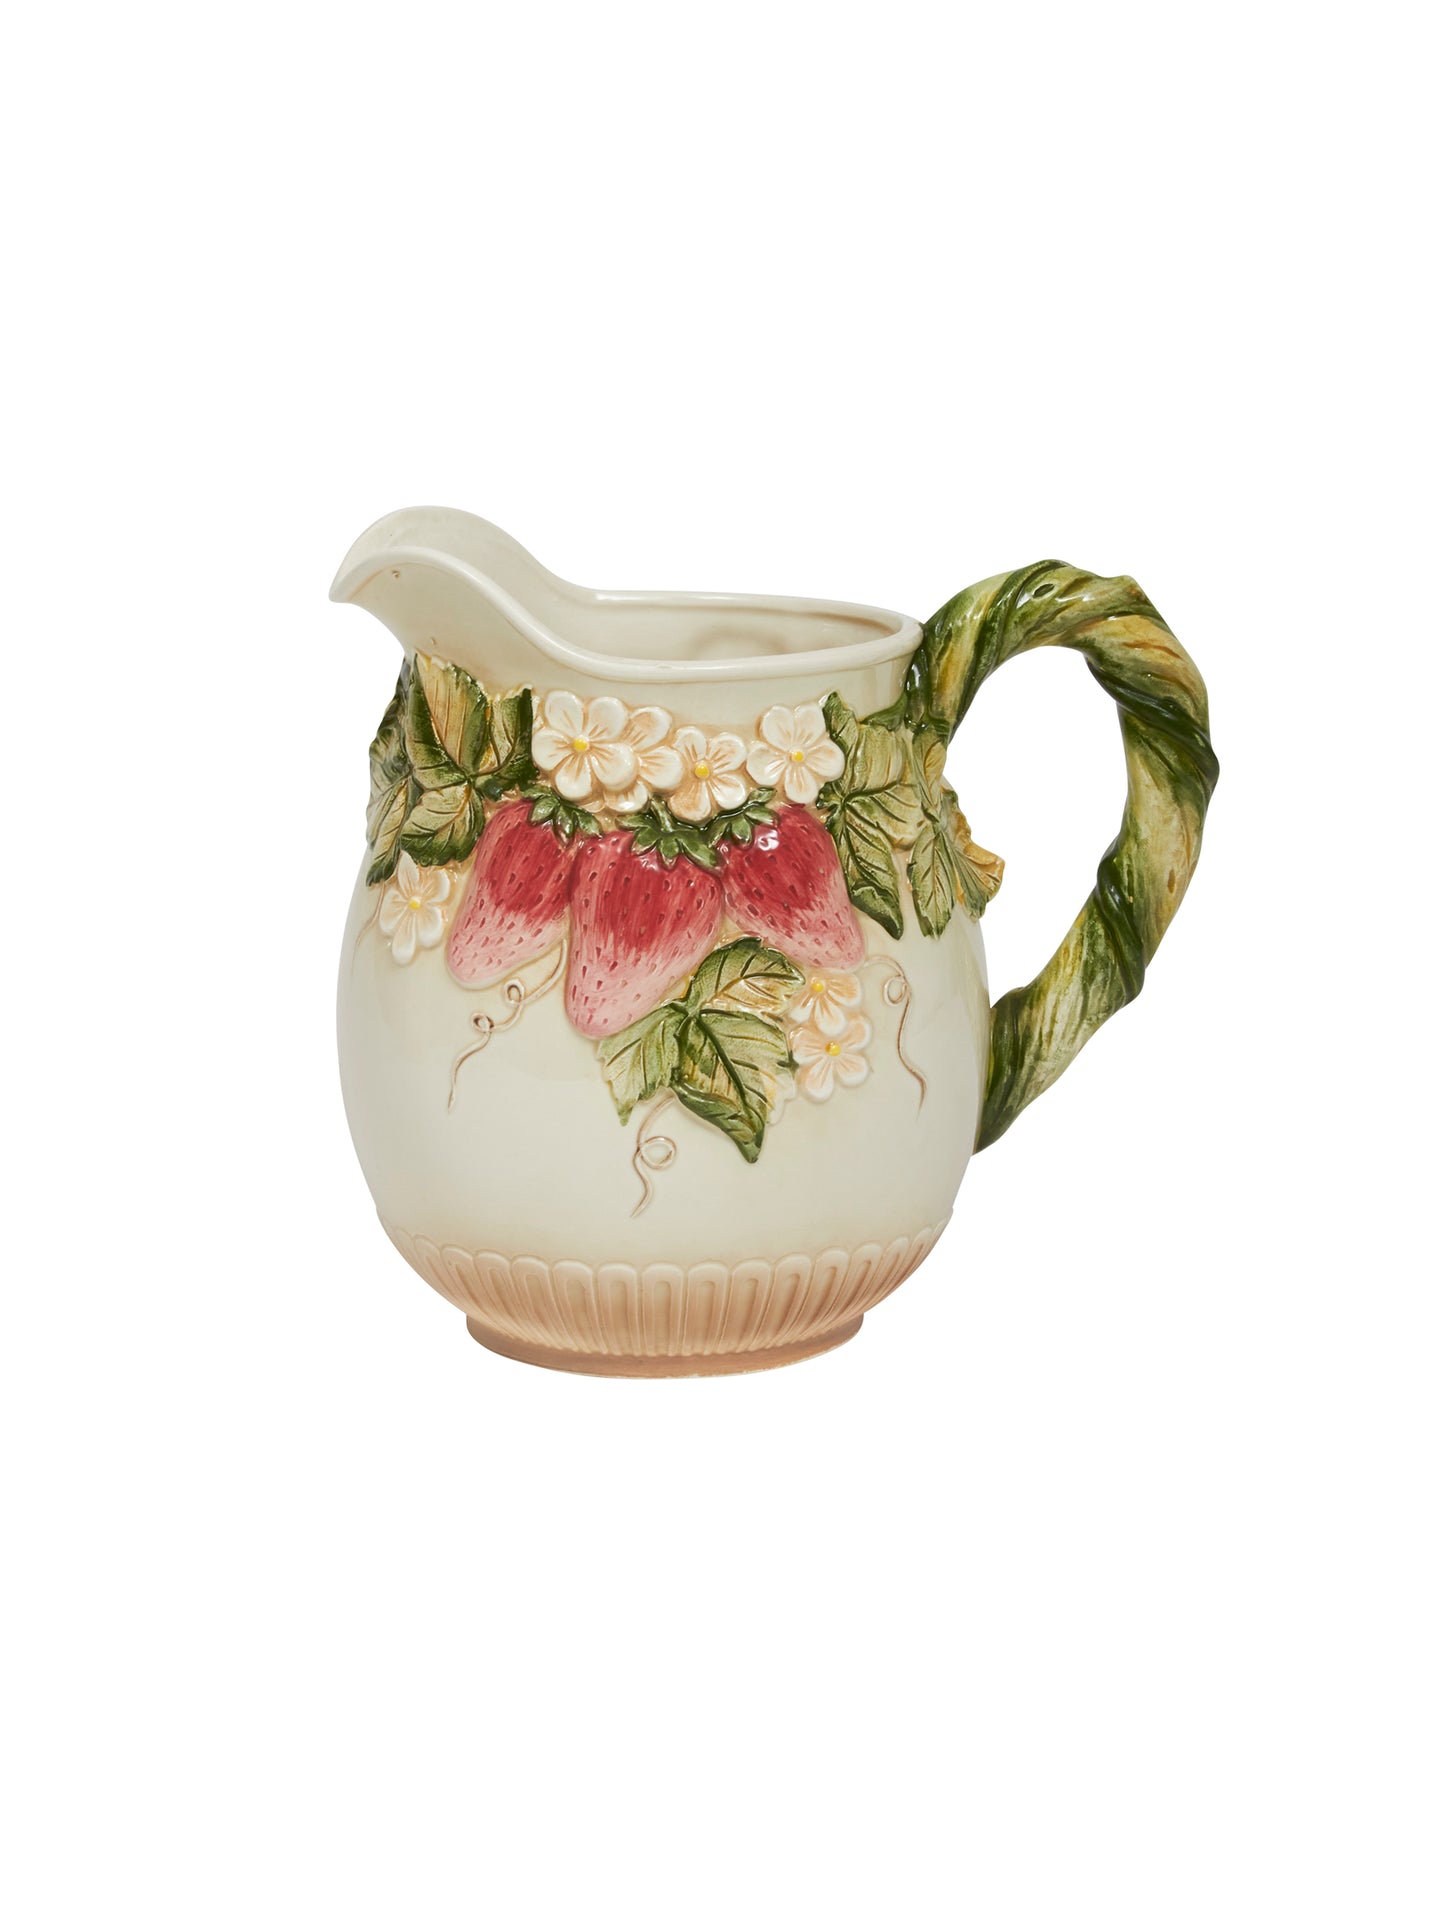 Vintage 1950s Hand Painted Strawberry Majolica Pitcher Weston Table